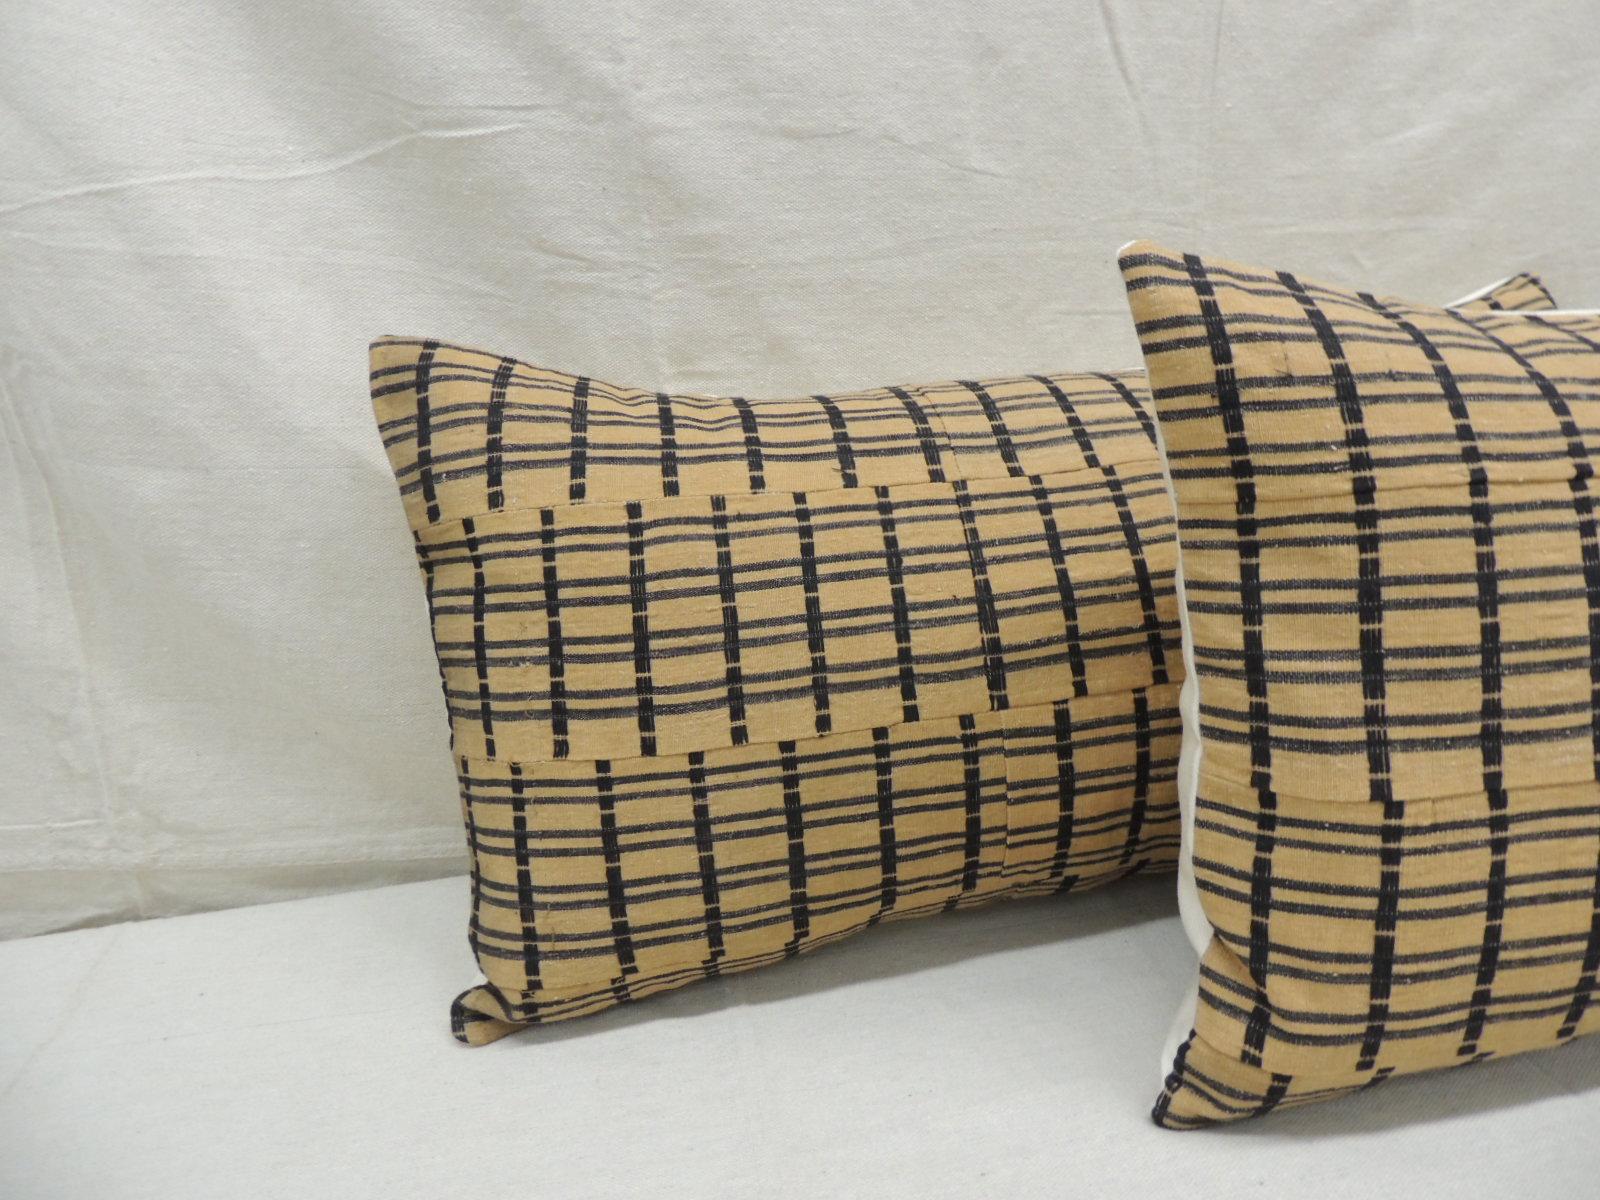 Vintage pair of yellow and dark blue African stripweaves long bolsters decorative pillows
with heavy woven linen backings.
Decorative pillow handcrafted and designed in the USA. 
Closure by stitch (no zipper closure) with custom made pillow